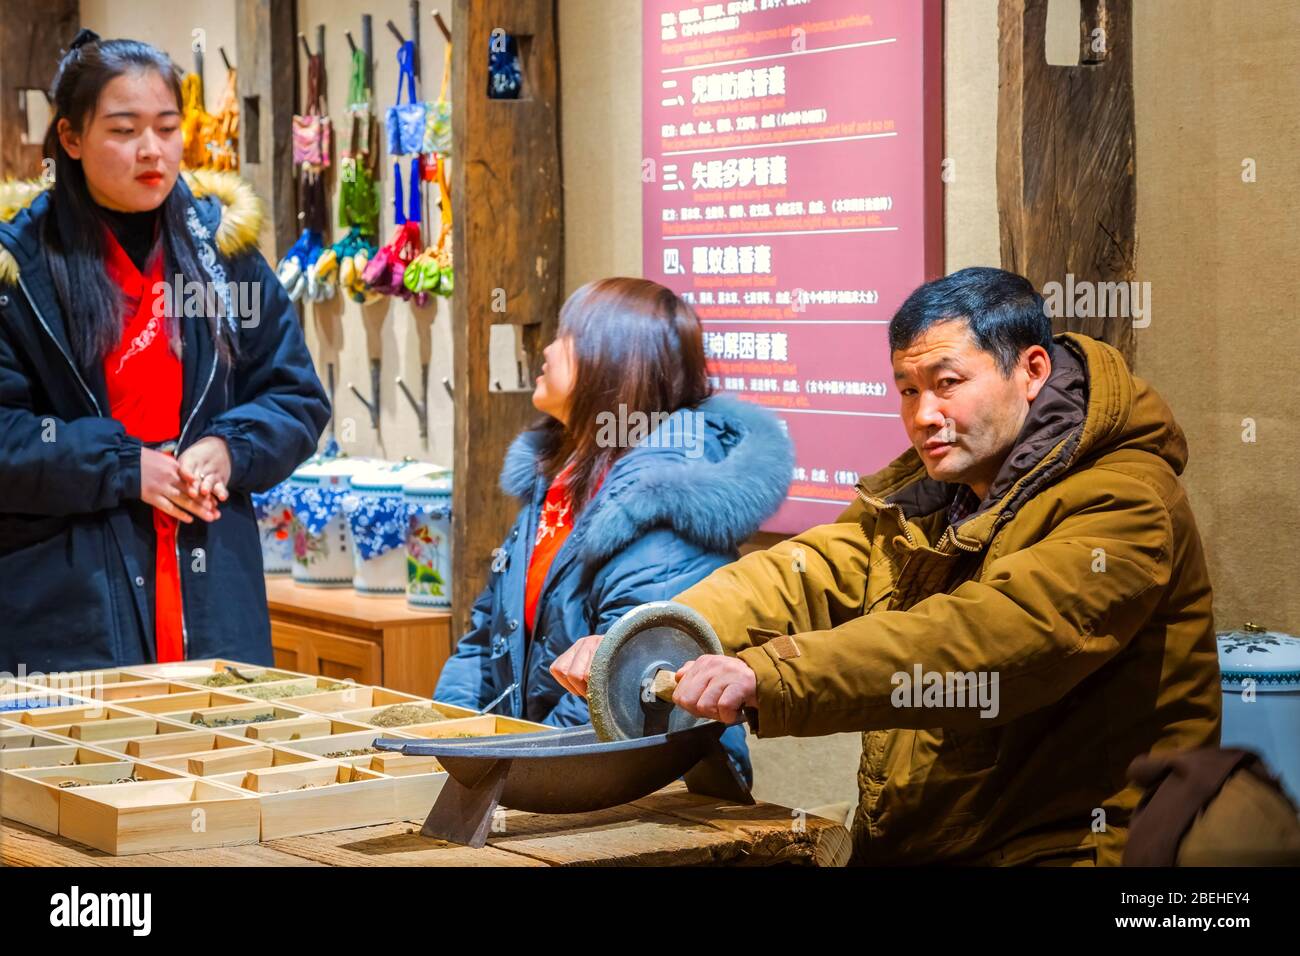 Beijing, China - Jan 14 2020: Unidentified people in a traditional drug store at Nanluoguxiang, a combination of traditional Beijing Hutong and refurb Stock Photo